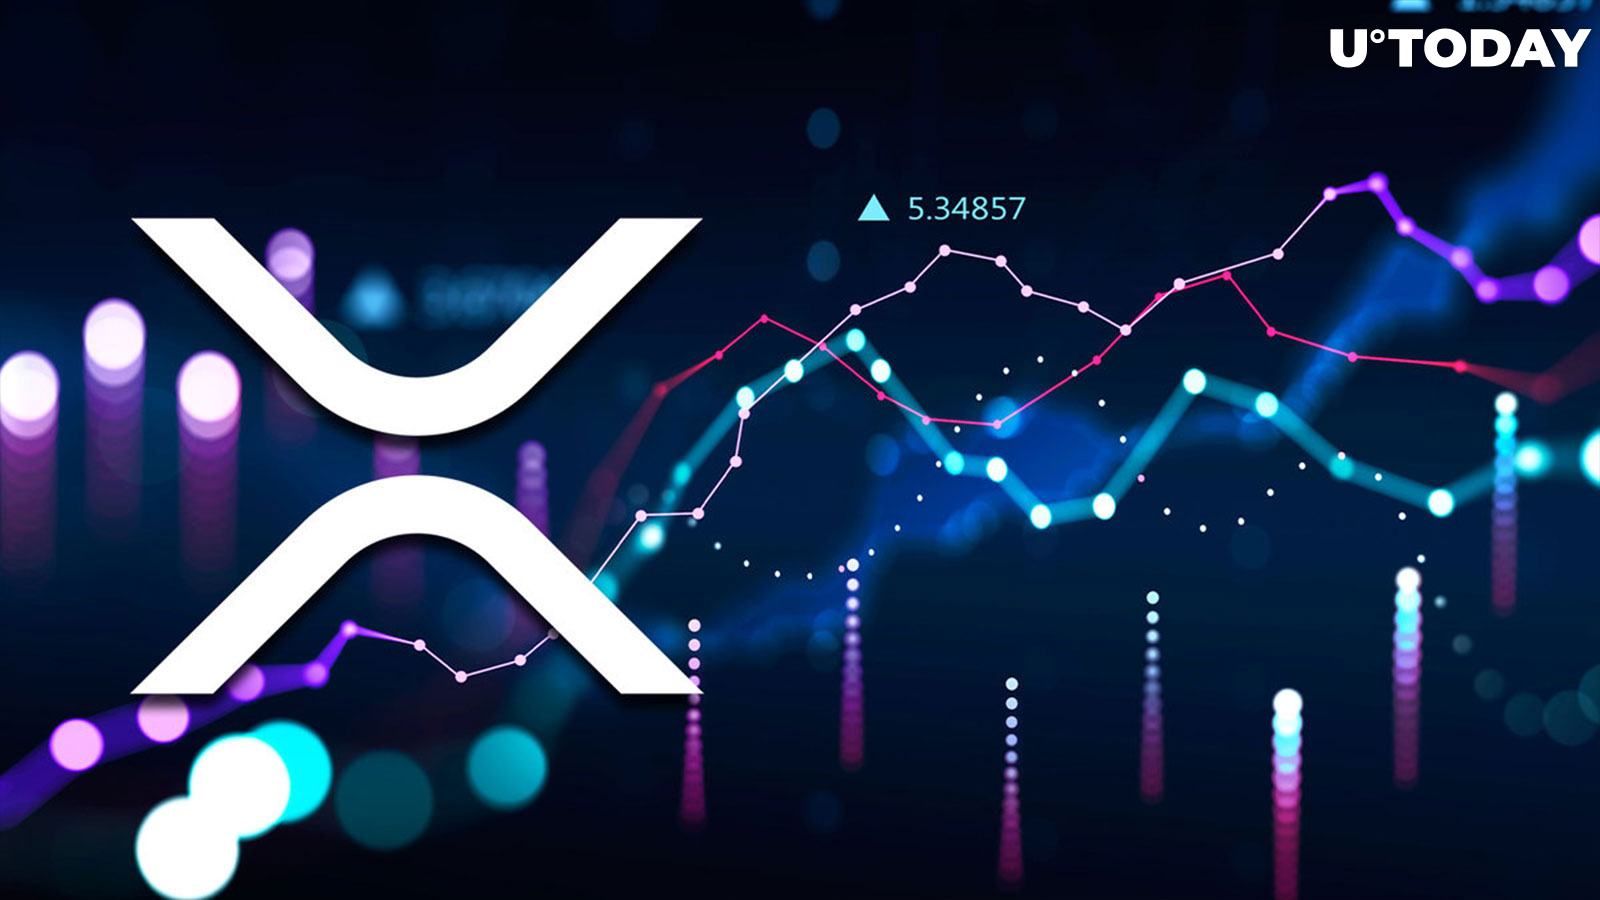 XRP Eyes 50% Price Increase If This Pattern Works: Top Crypto Analyst